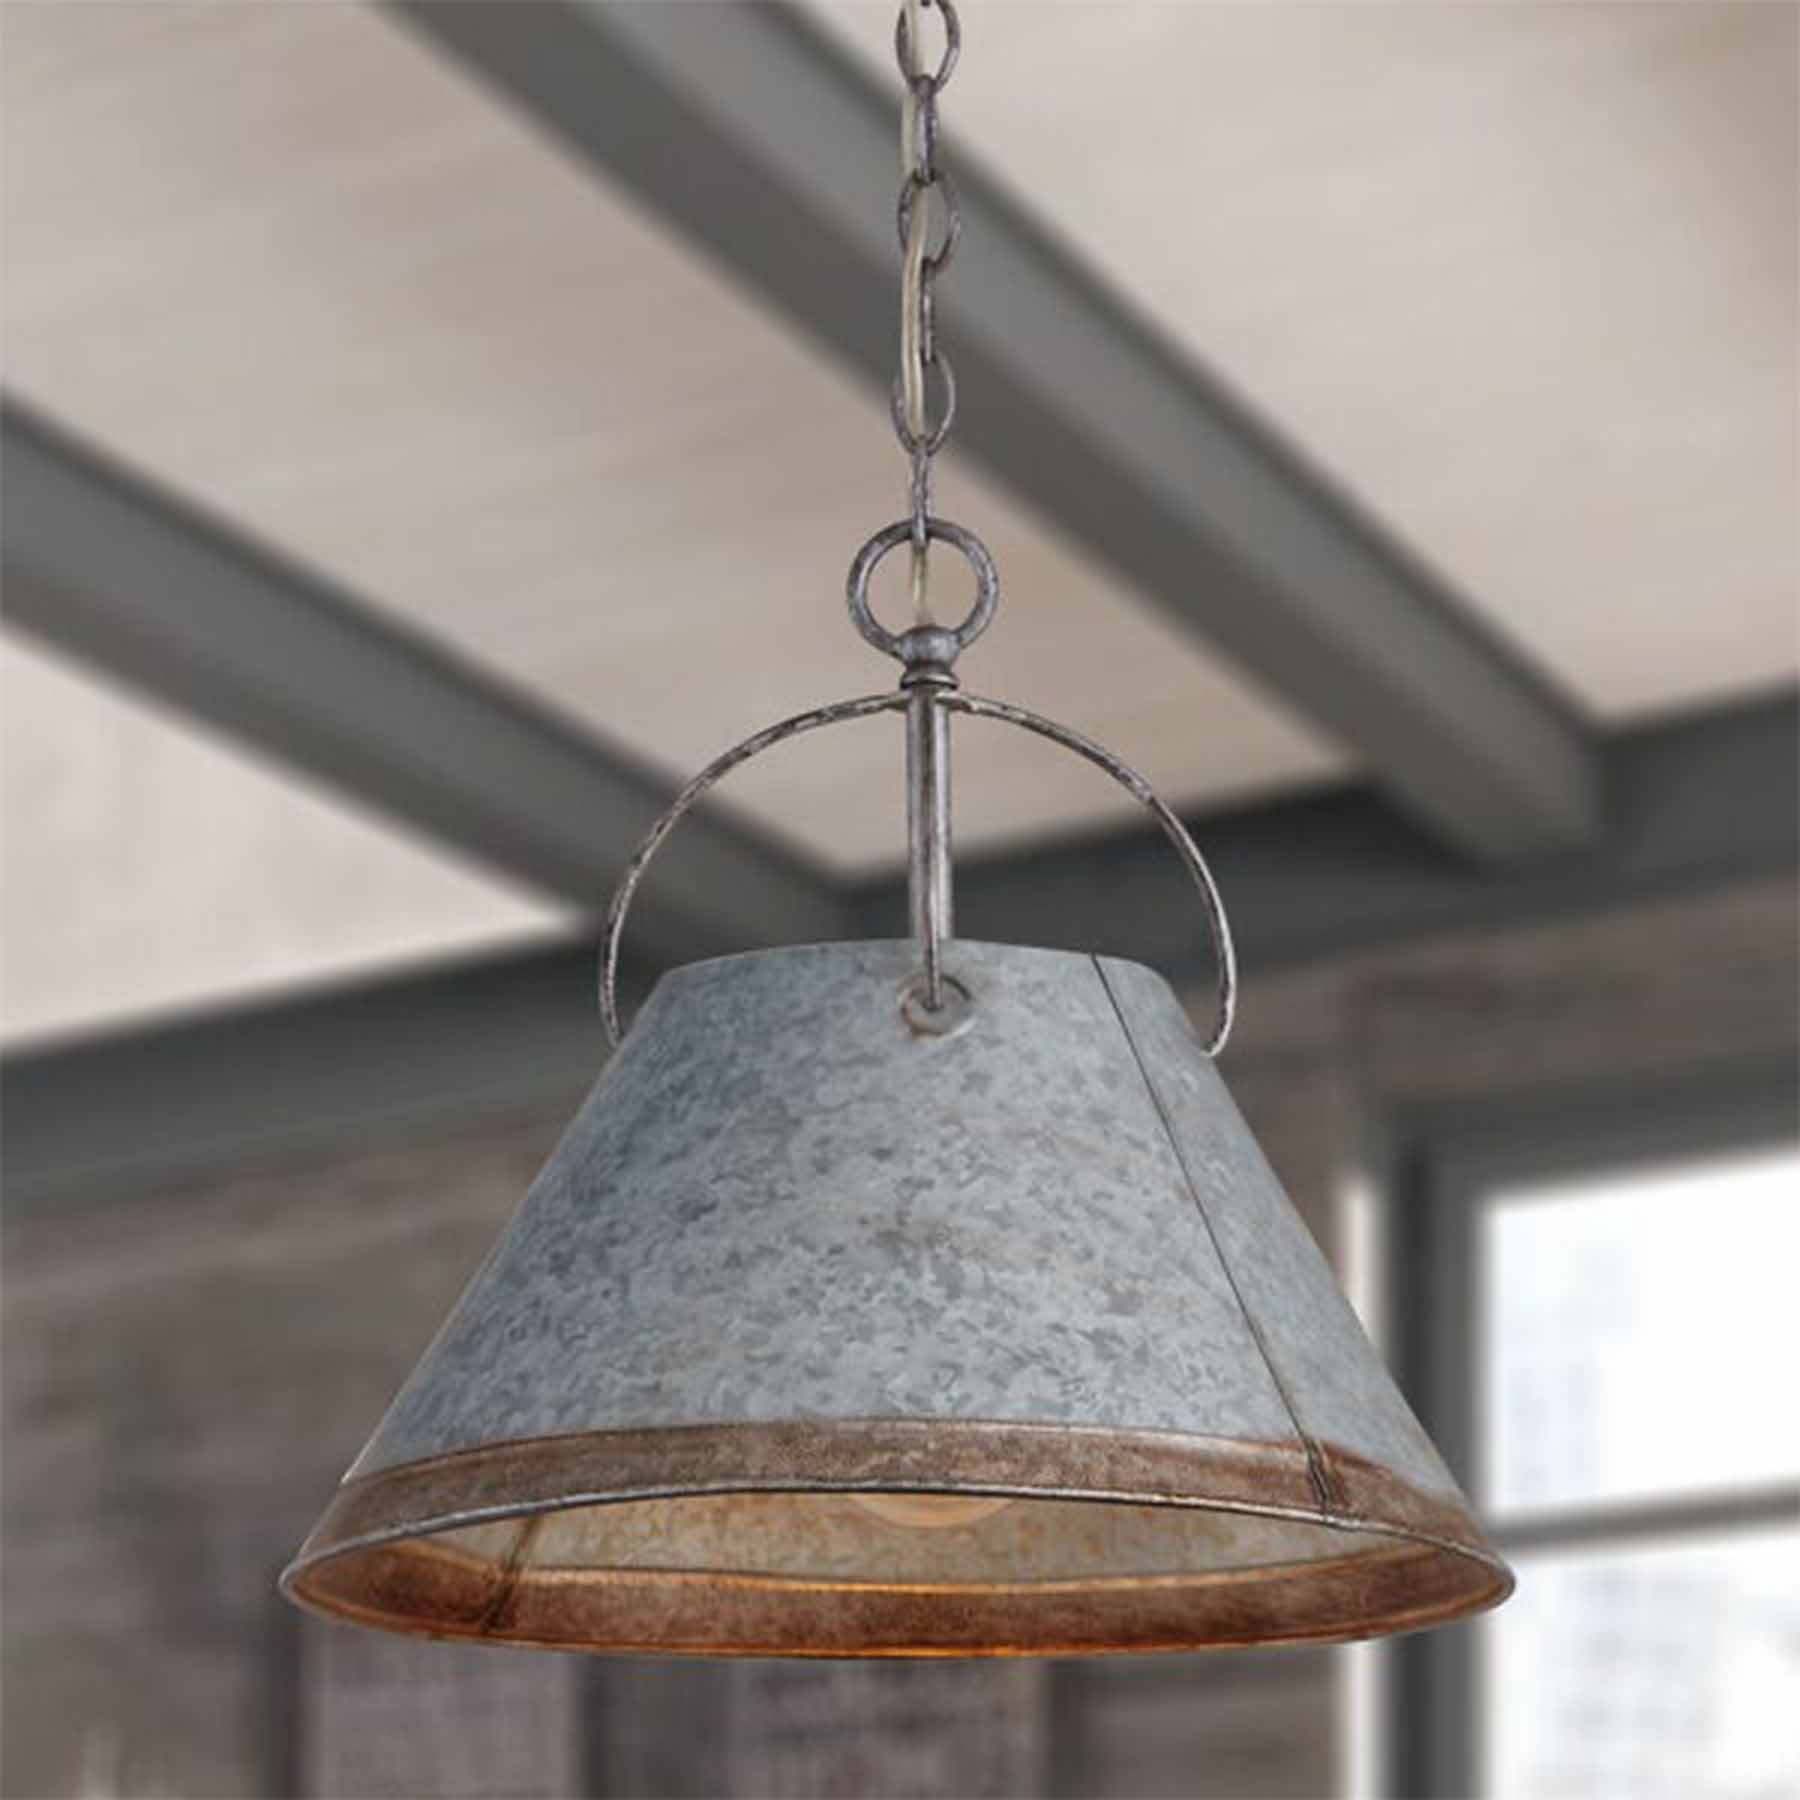 the galvanized metal cone shape is popular and highly appreciated for its uniqueness